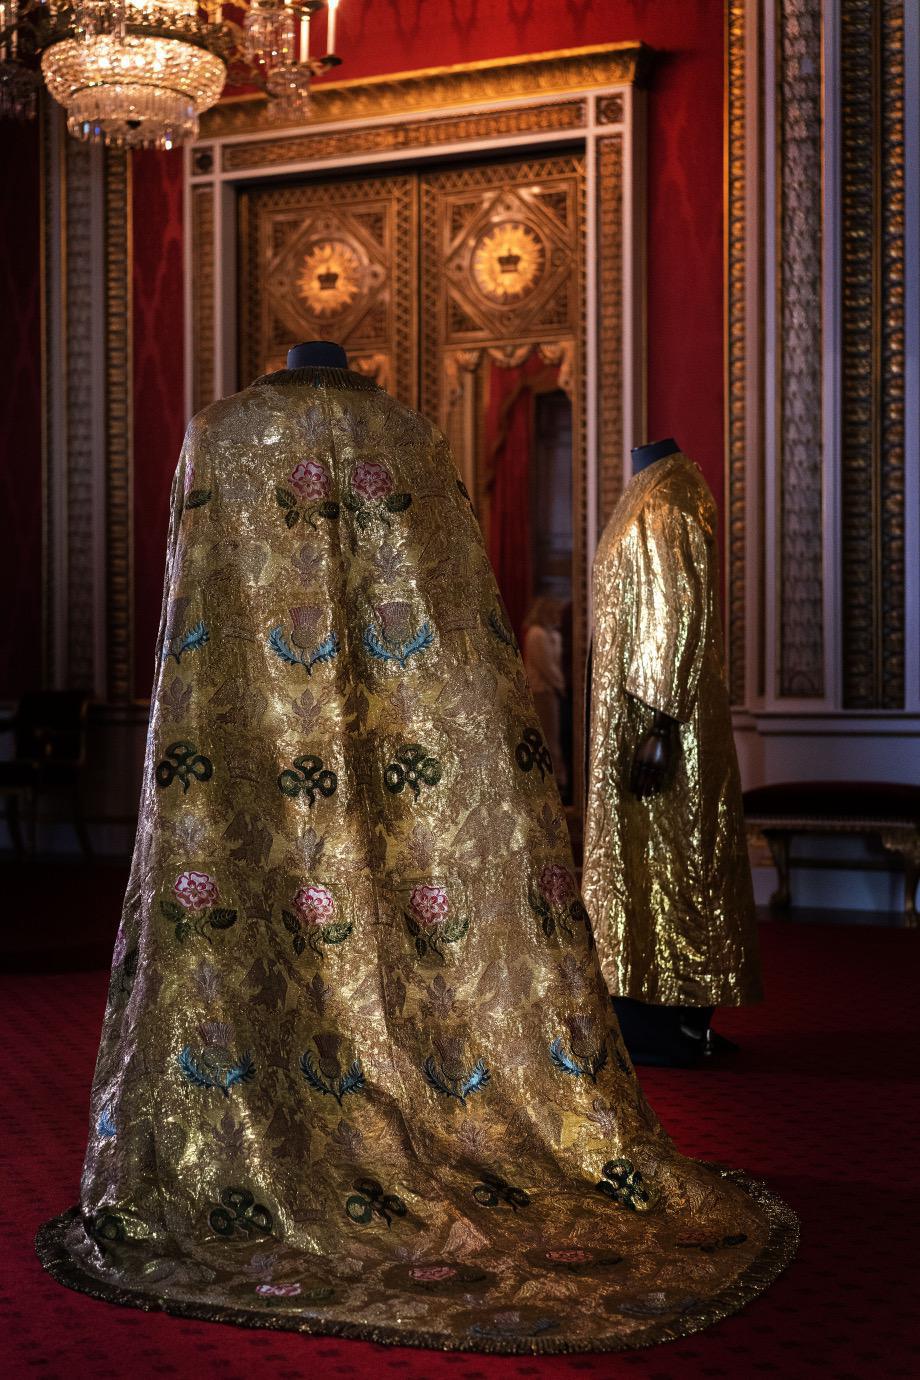 Historic Coronation Vestments from the Royal Collection will be reused by His Majesty The King for the Coronation Service at Westminster Abbey